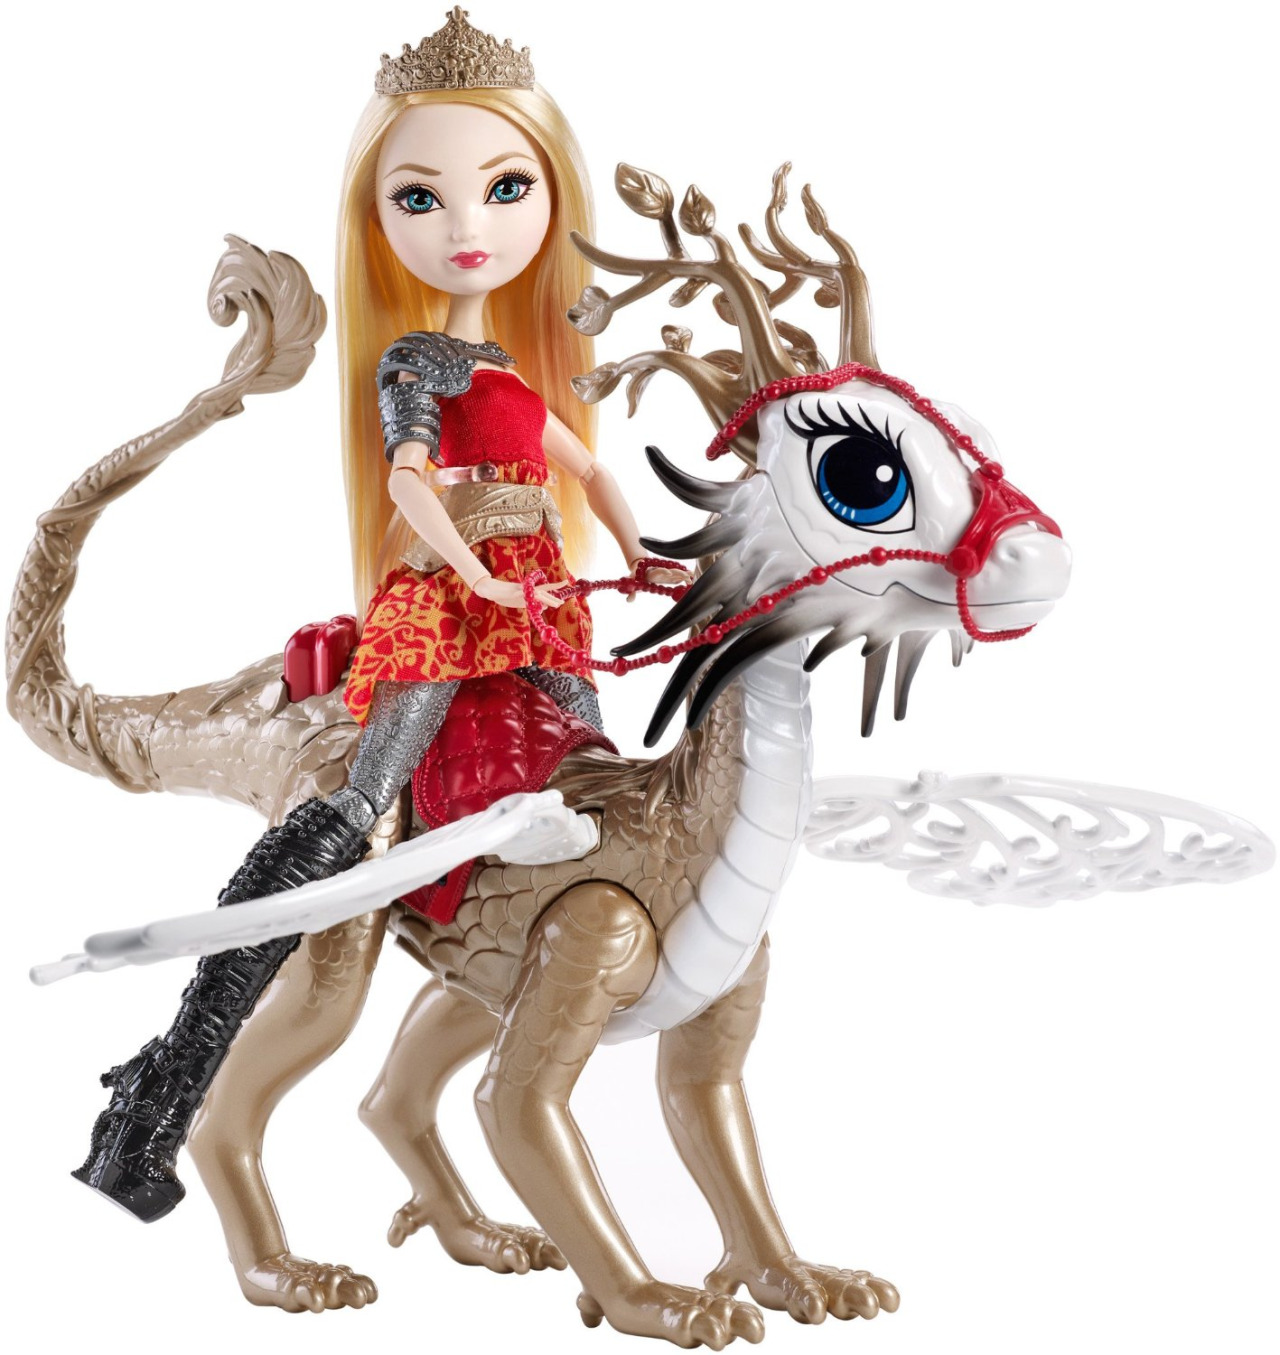 where to buy ever after high dolls